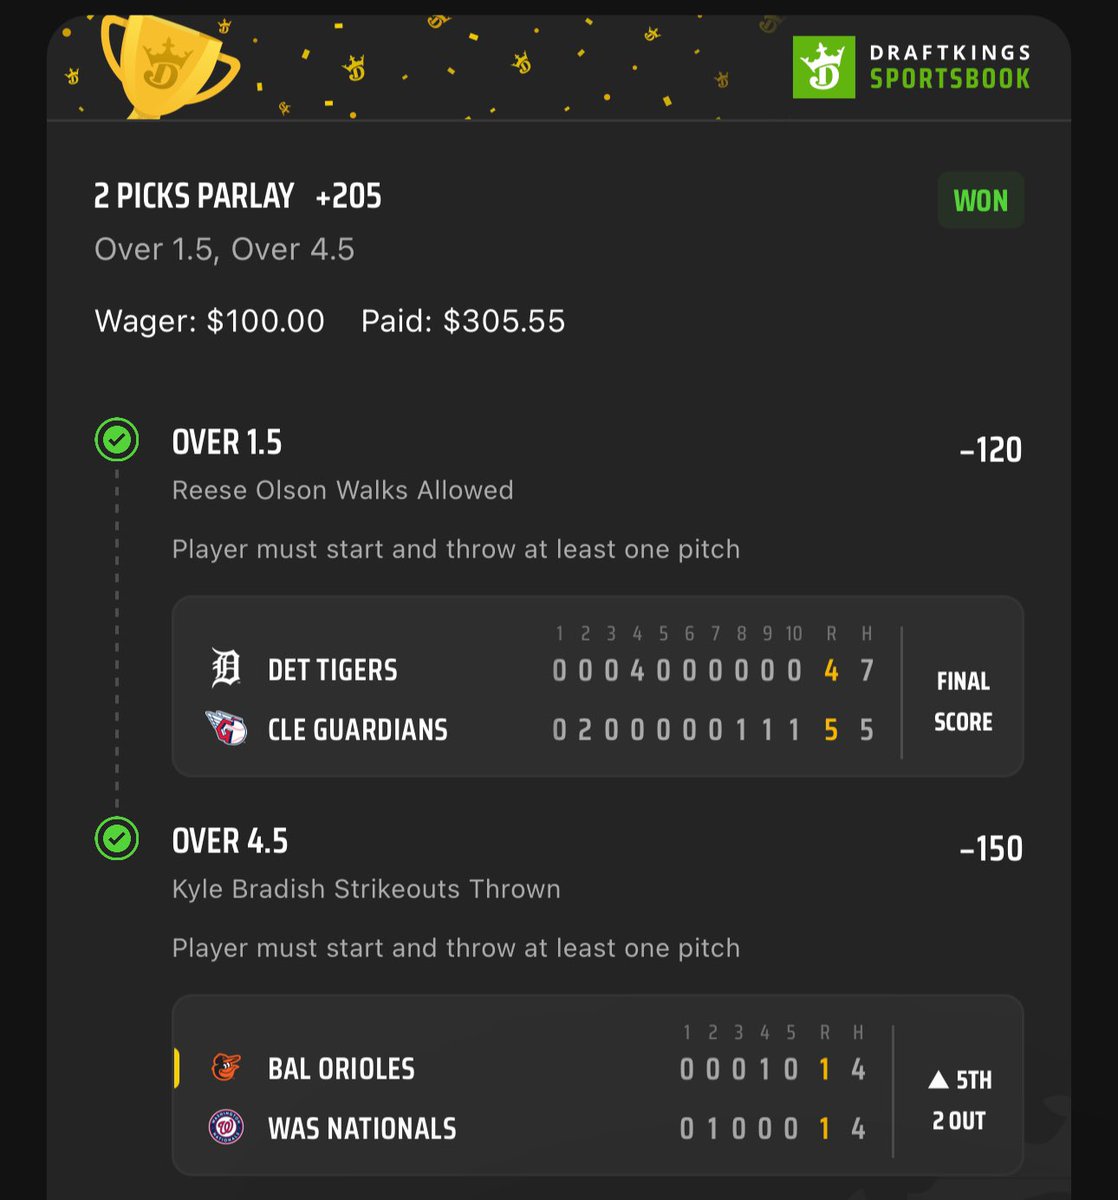 BANGGGG✅✅✅

Easy cash to start the day with some MLB. Now let’s gear up for NBA soon🔥

Leave a ❤️ & RT if you tailed
#GamblingTwitter #PlayerProps #PrizePicks #Like #Sportsbook #NBA #GamblingX #DraftKings #Fanduel #TrendingNow #Prizepickswinning